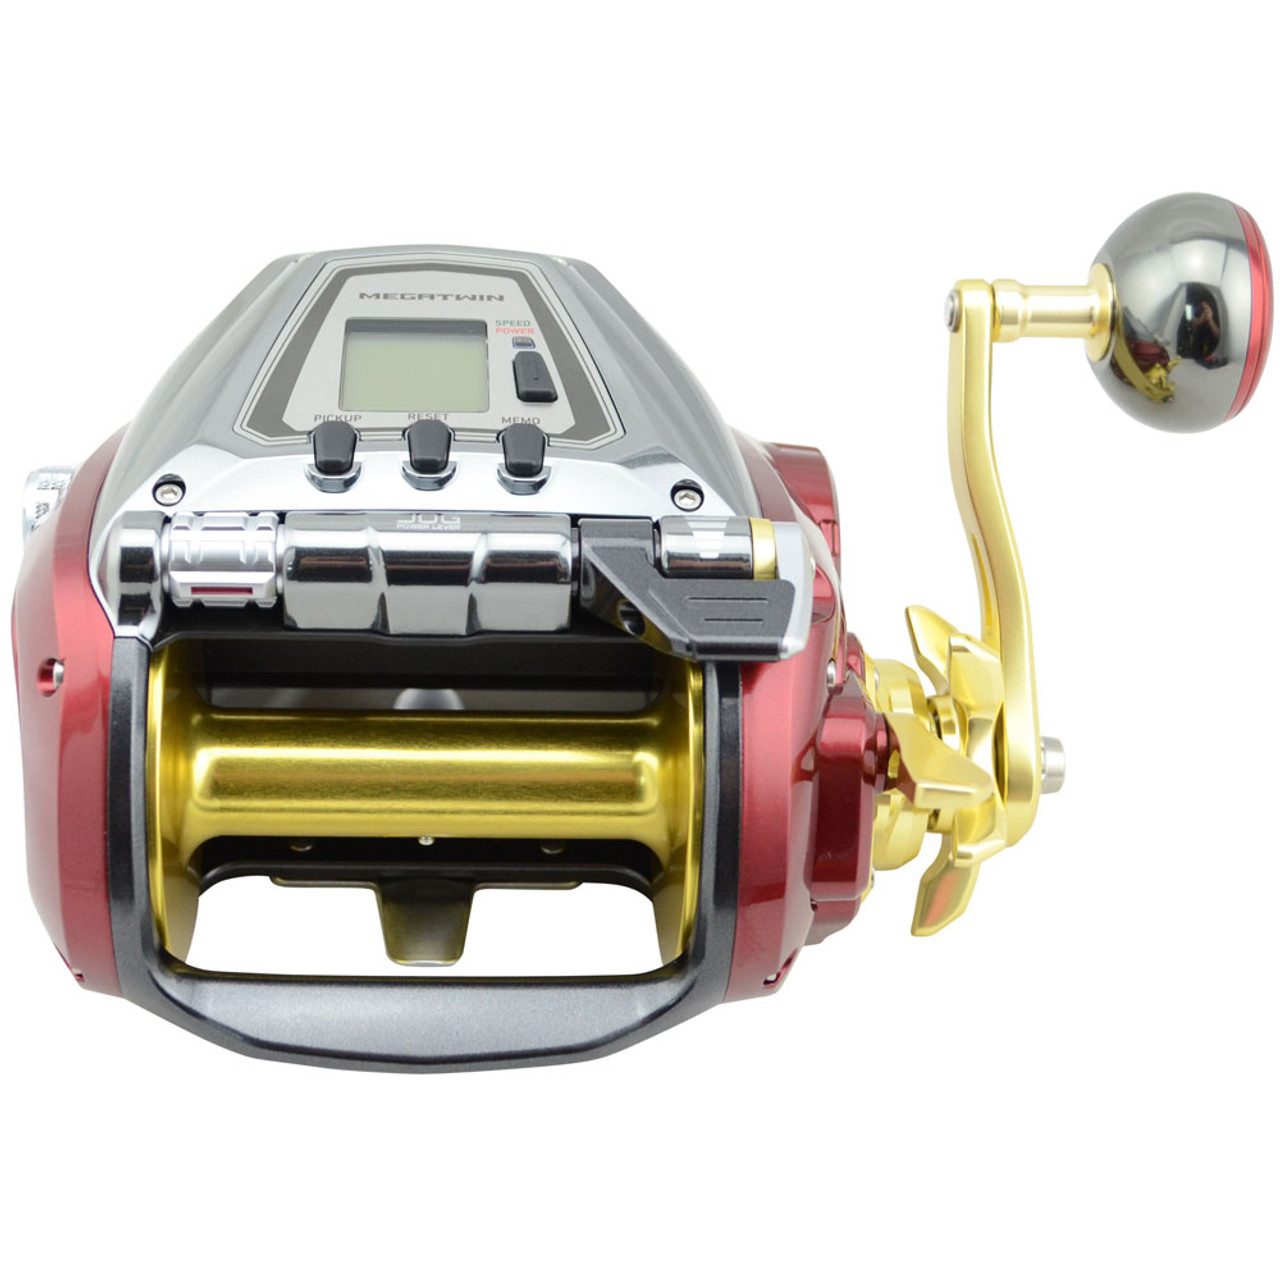 Sale online  Opening Sales Daiwa Seaborg Megatwin Electric Reel color  variants at